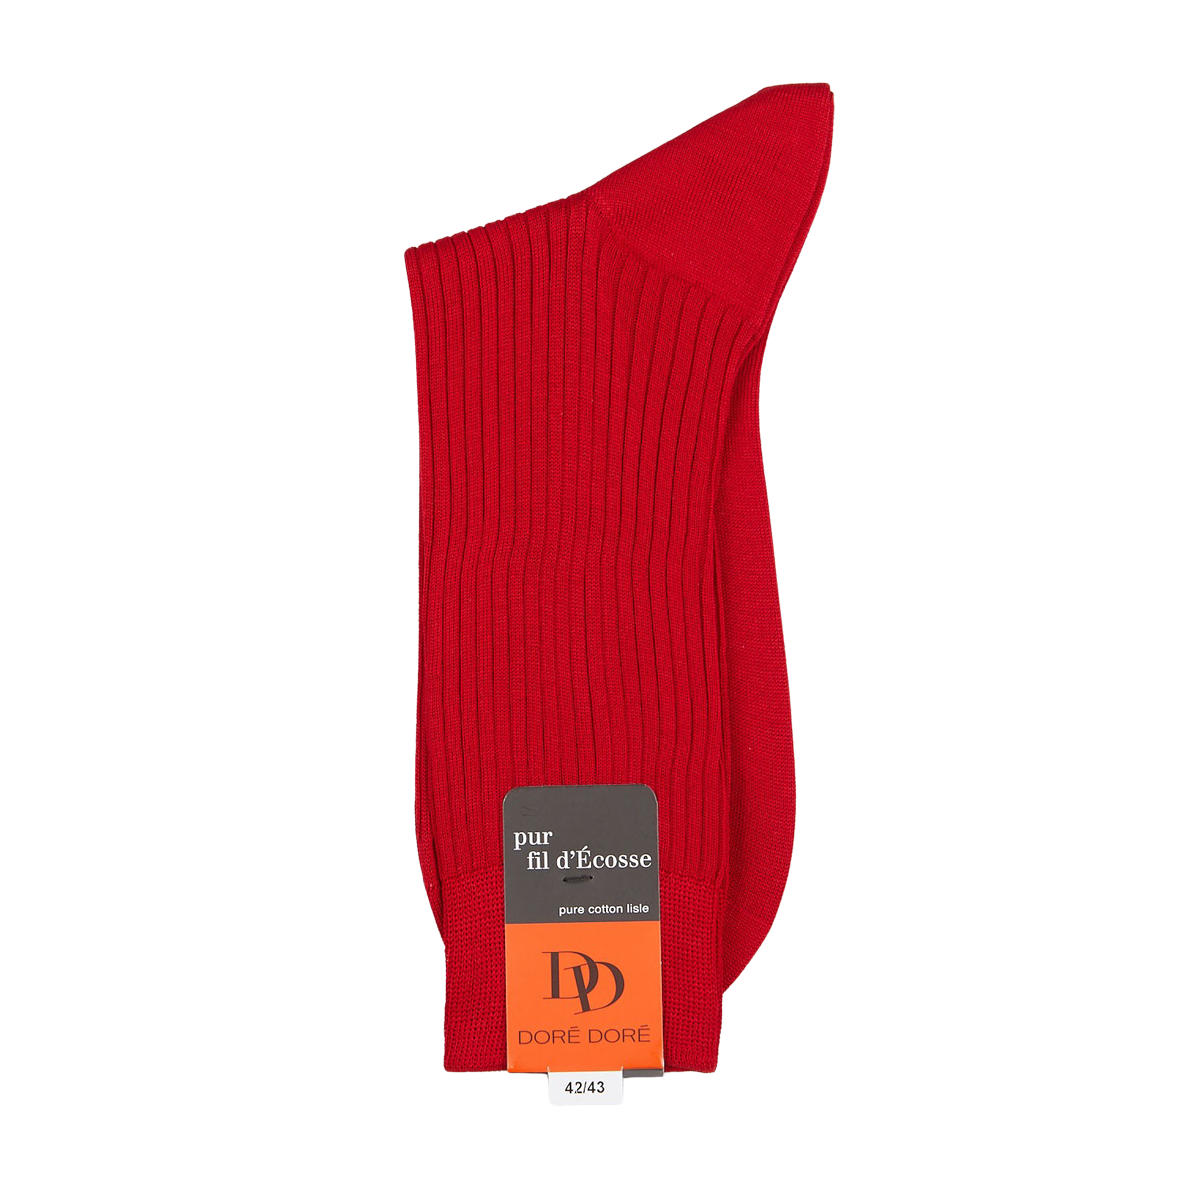 A single Groseille Red Cotton Fil d'Ècosse Ribbed Socks with a black label reading "mercerised cotton lisle, pure cotton lisle" by Doré Doré displayed on a white background.